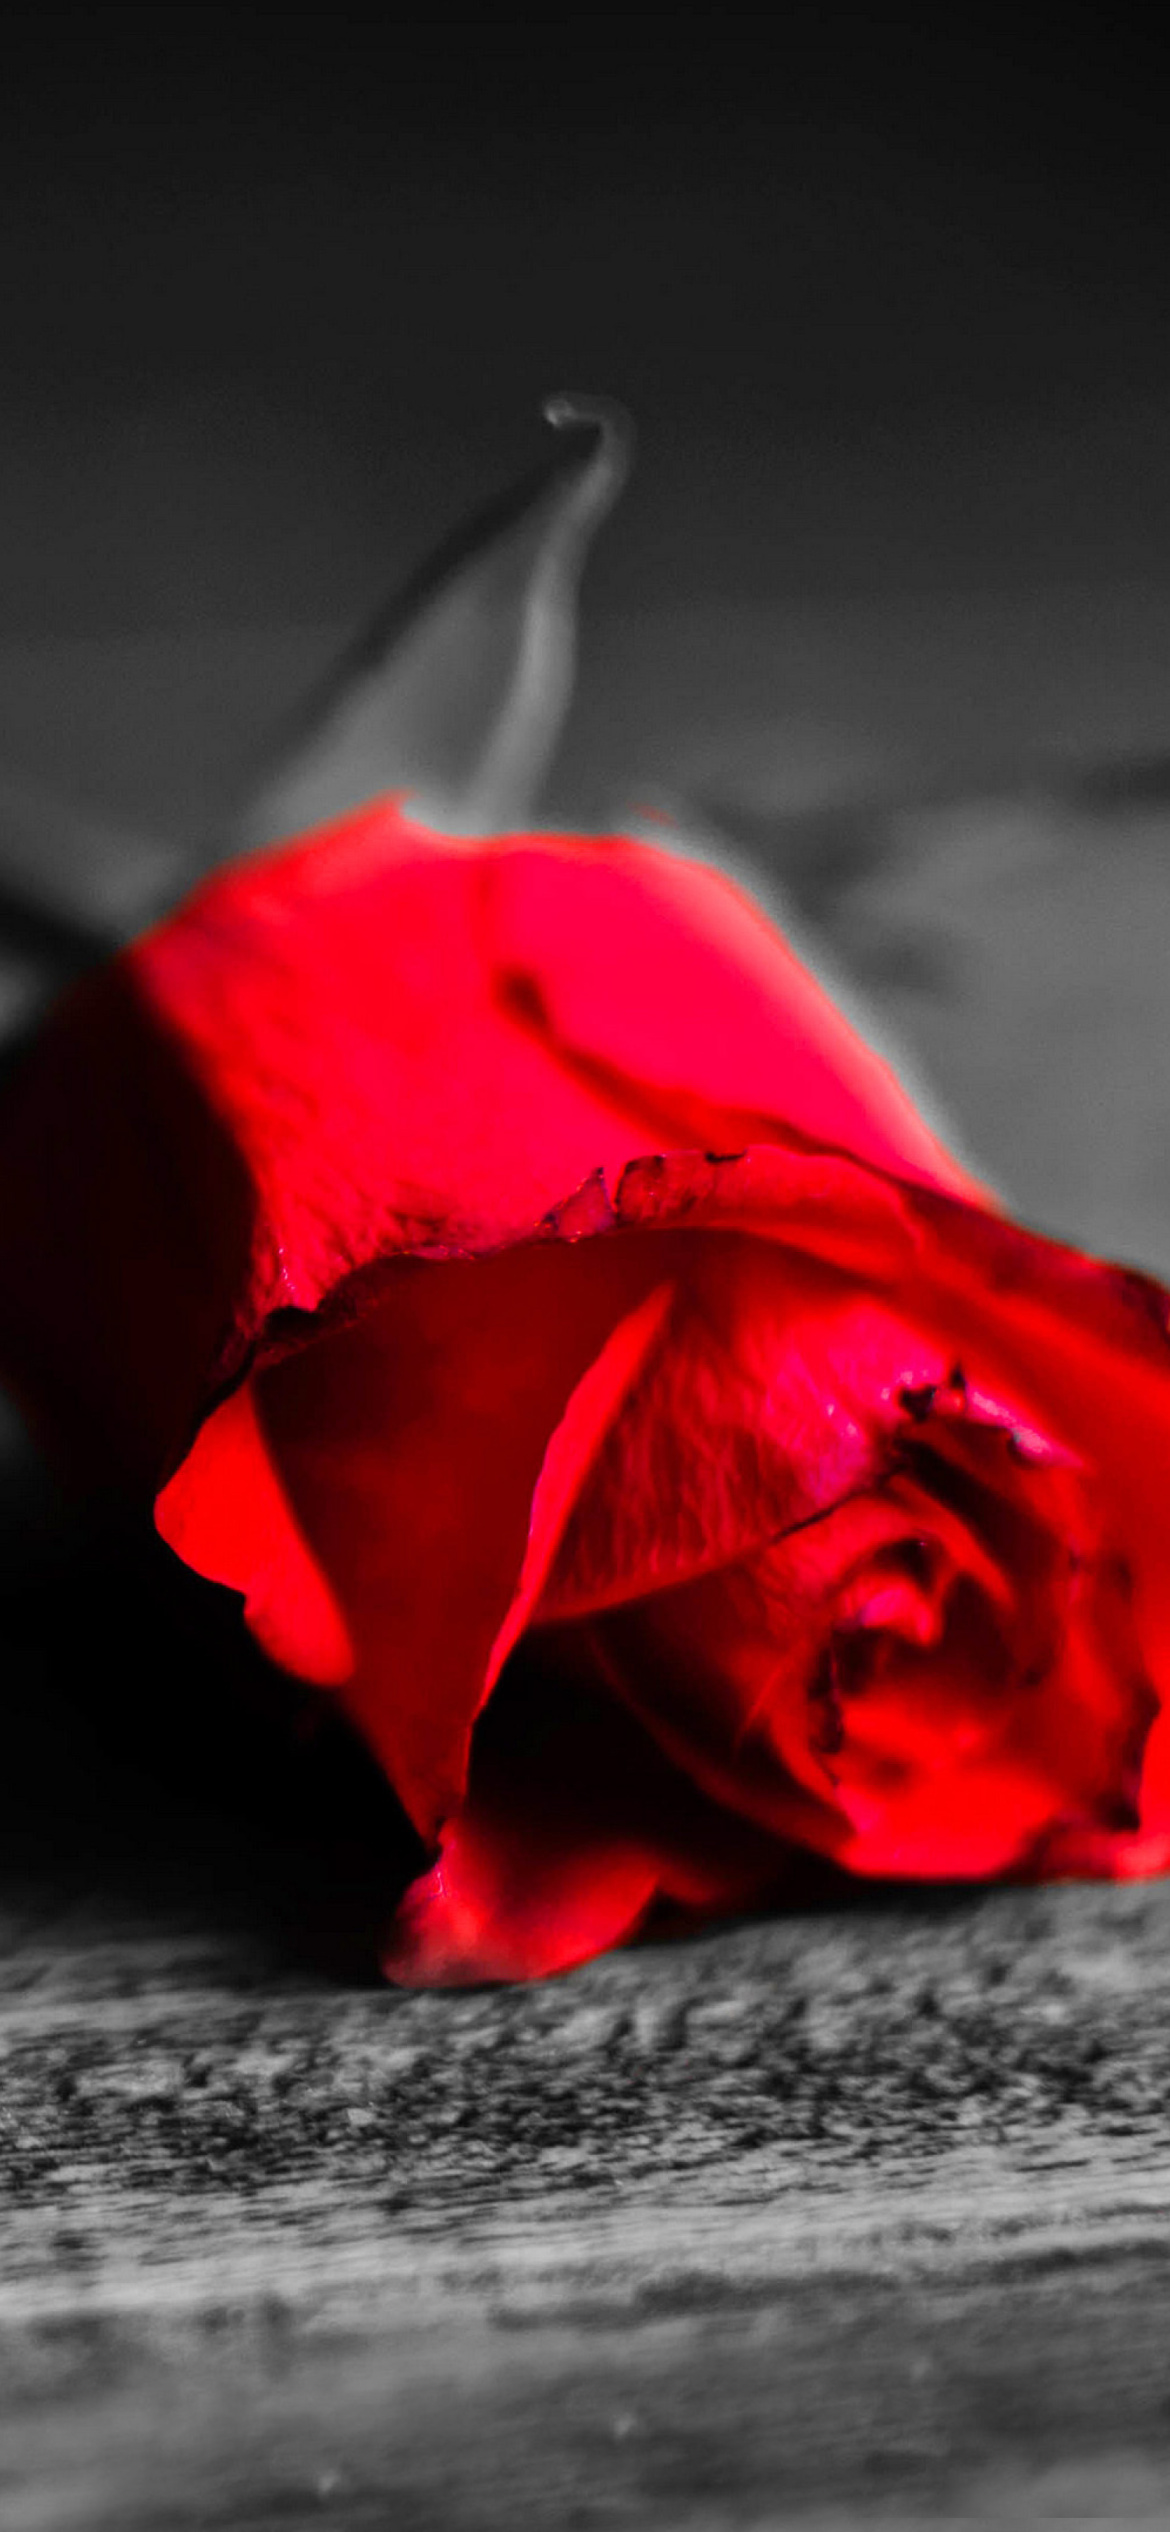 Das Red Rose On Wooden Surface Wallpaper 1170x2532